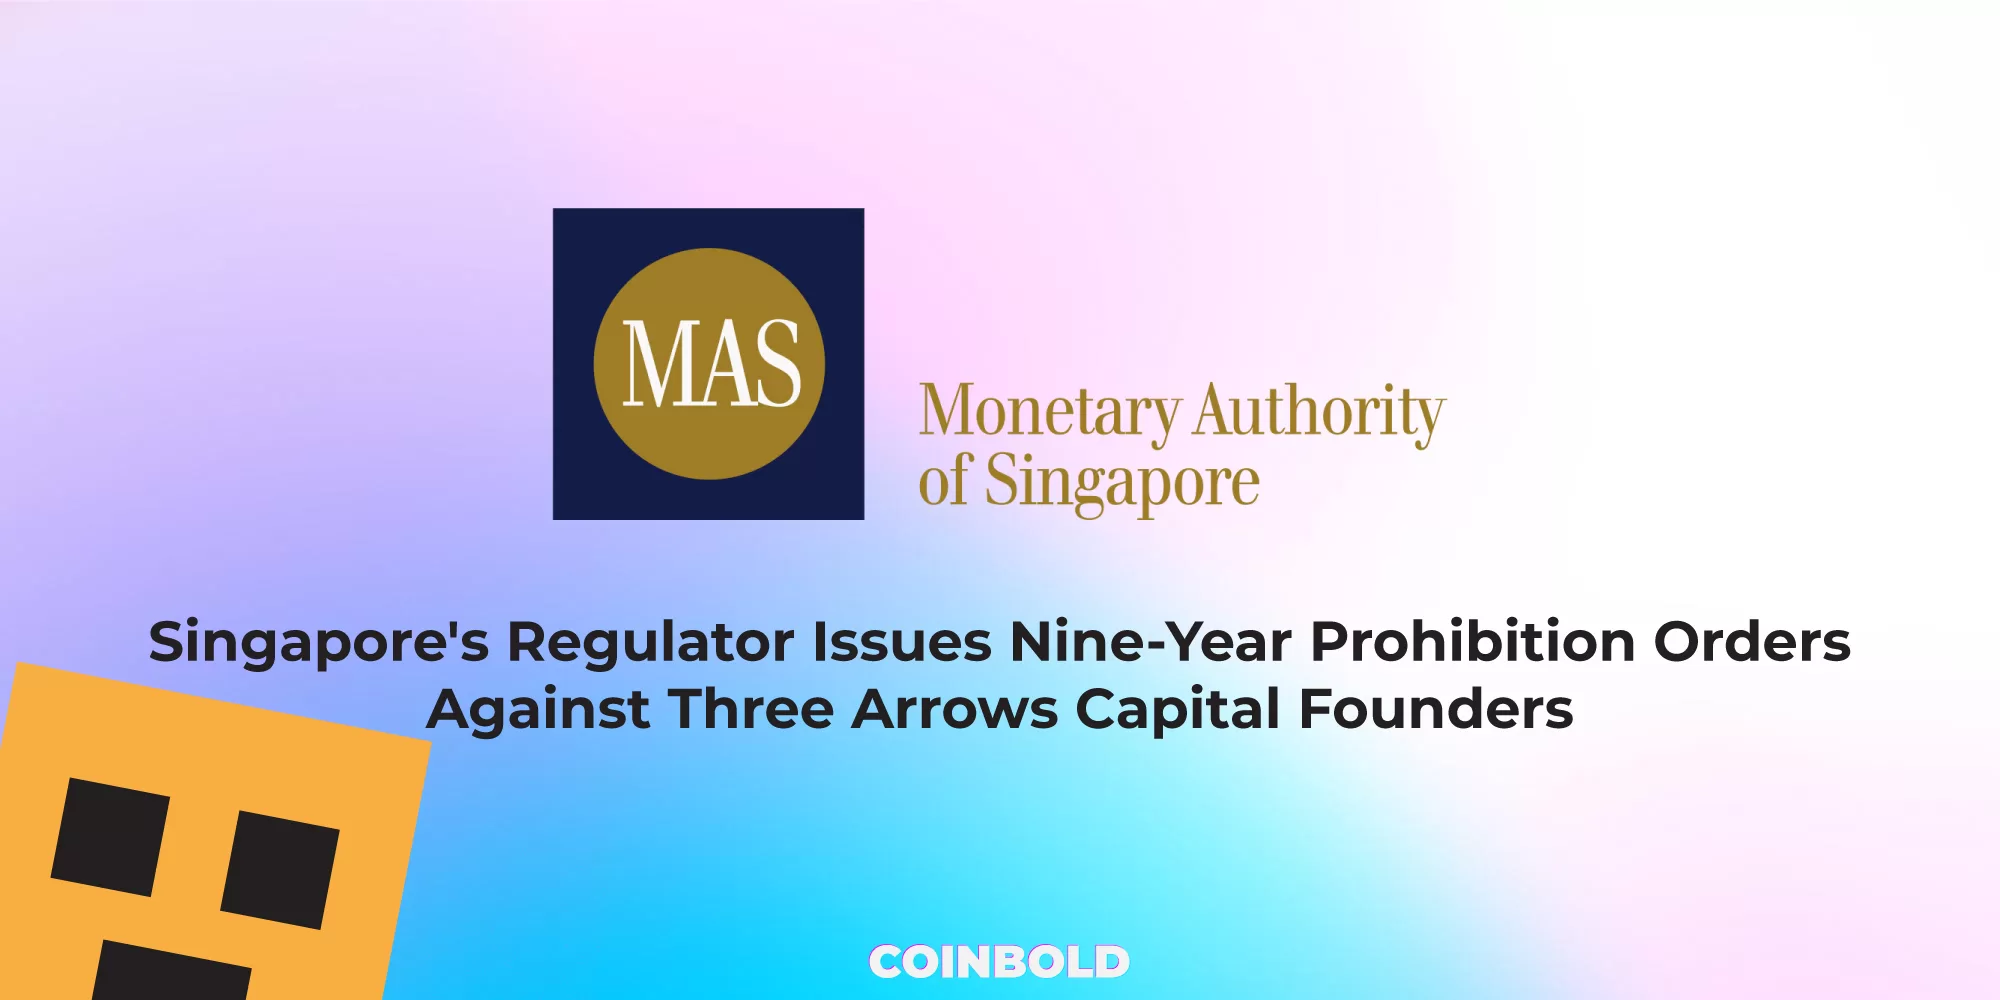 Singapore's Regulator Issues Nine Year Prohibition Orders Against Three Arrows Capital Founders